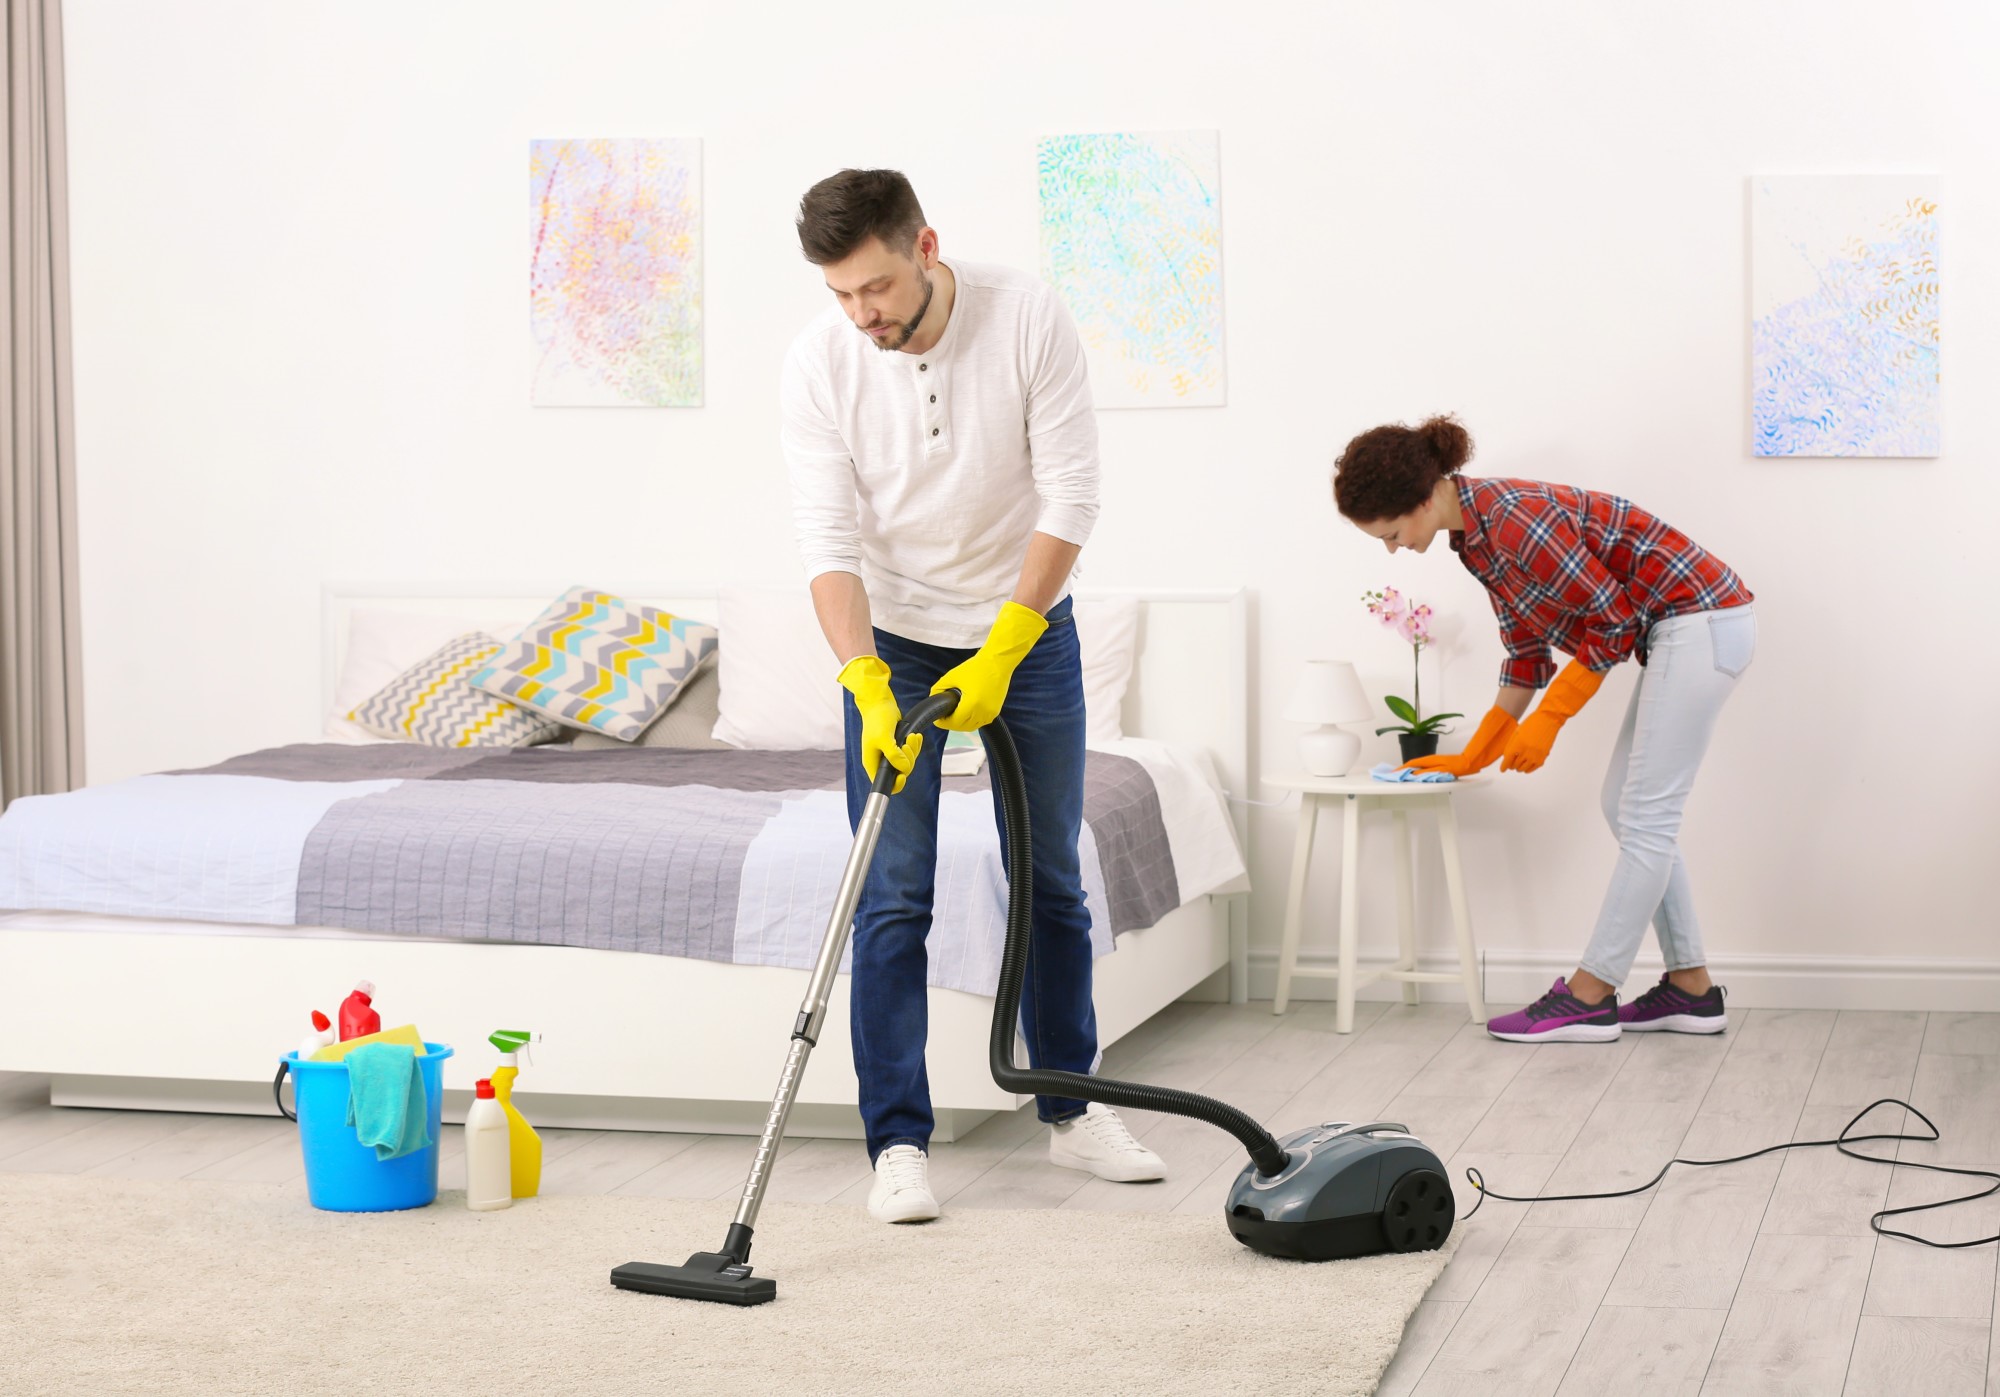 Self Improvement Begins with Cleaning Your Space!